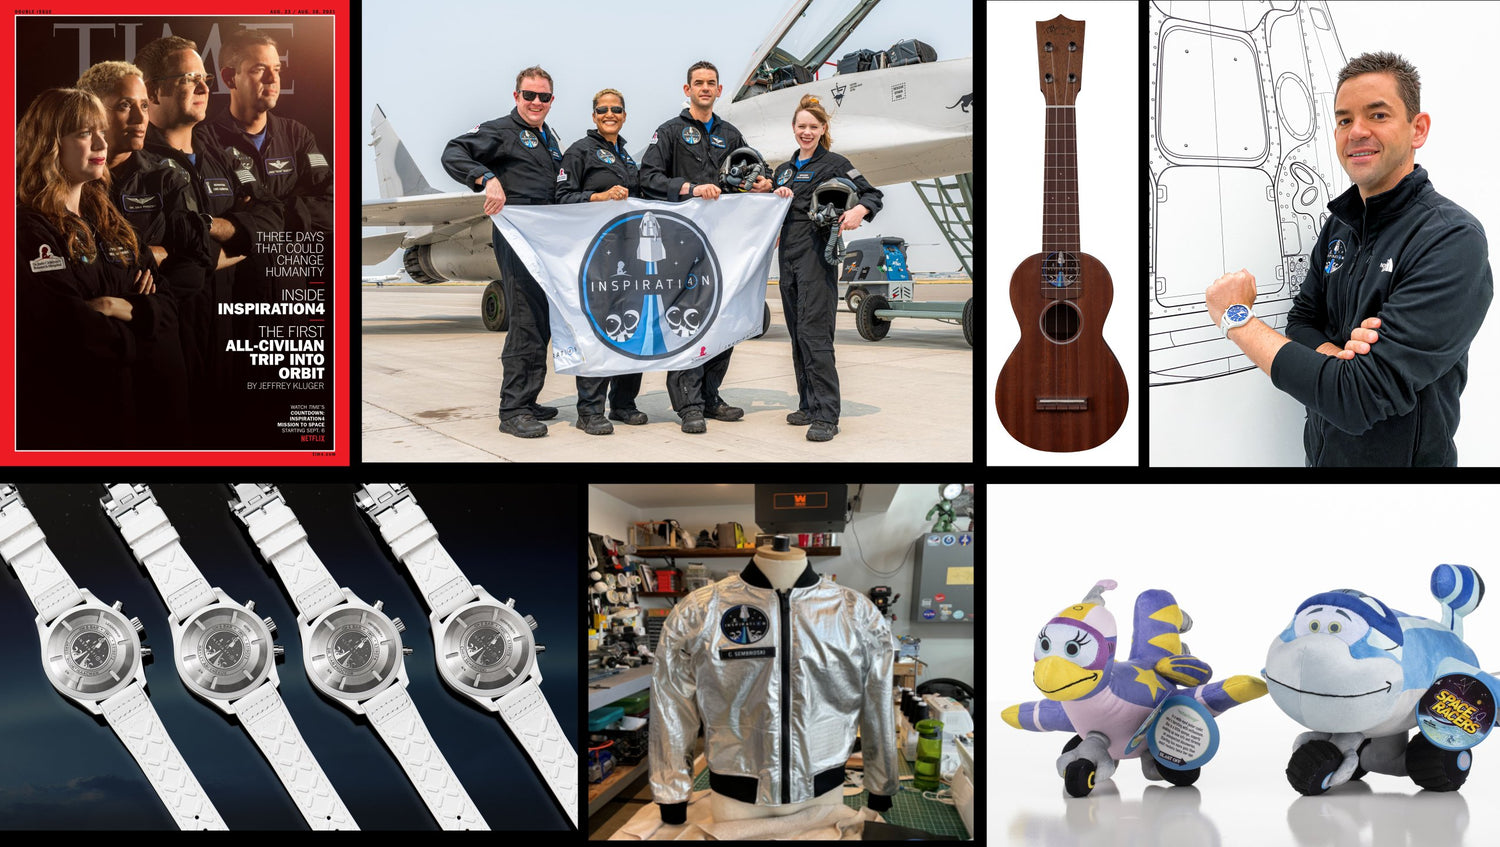 SpaceX Inspiration4 Will Auction Items Flown To Space To Fundraise For St. Jude Children’s Research Hospital, Including NFT Music & Art!